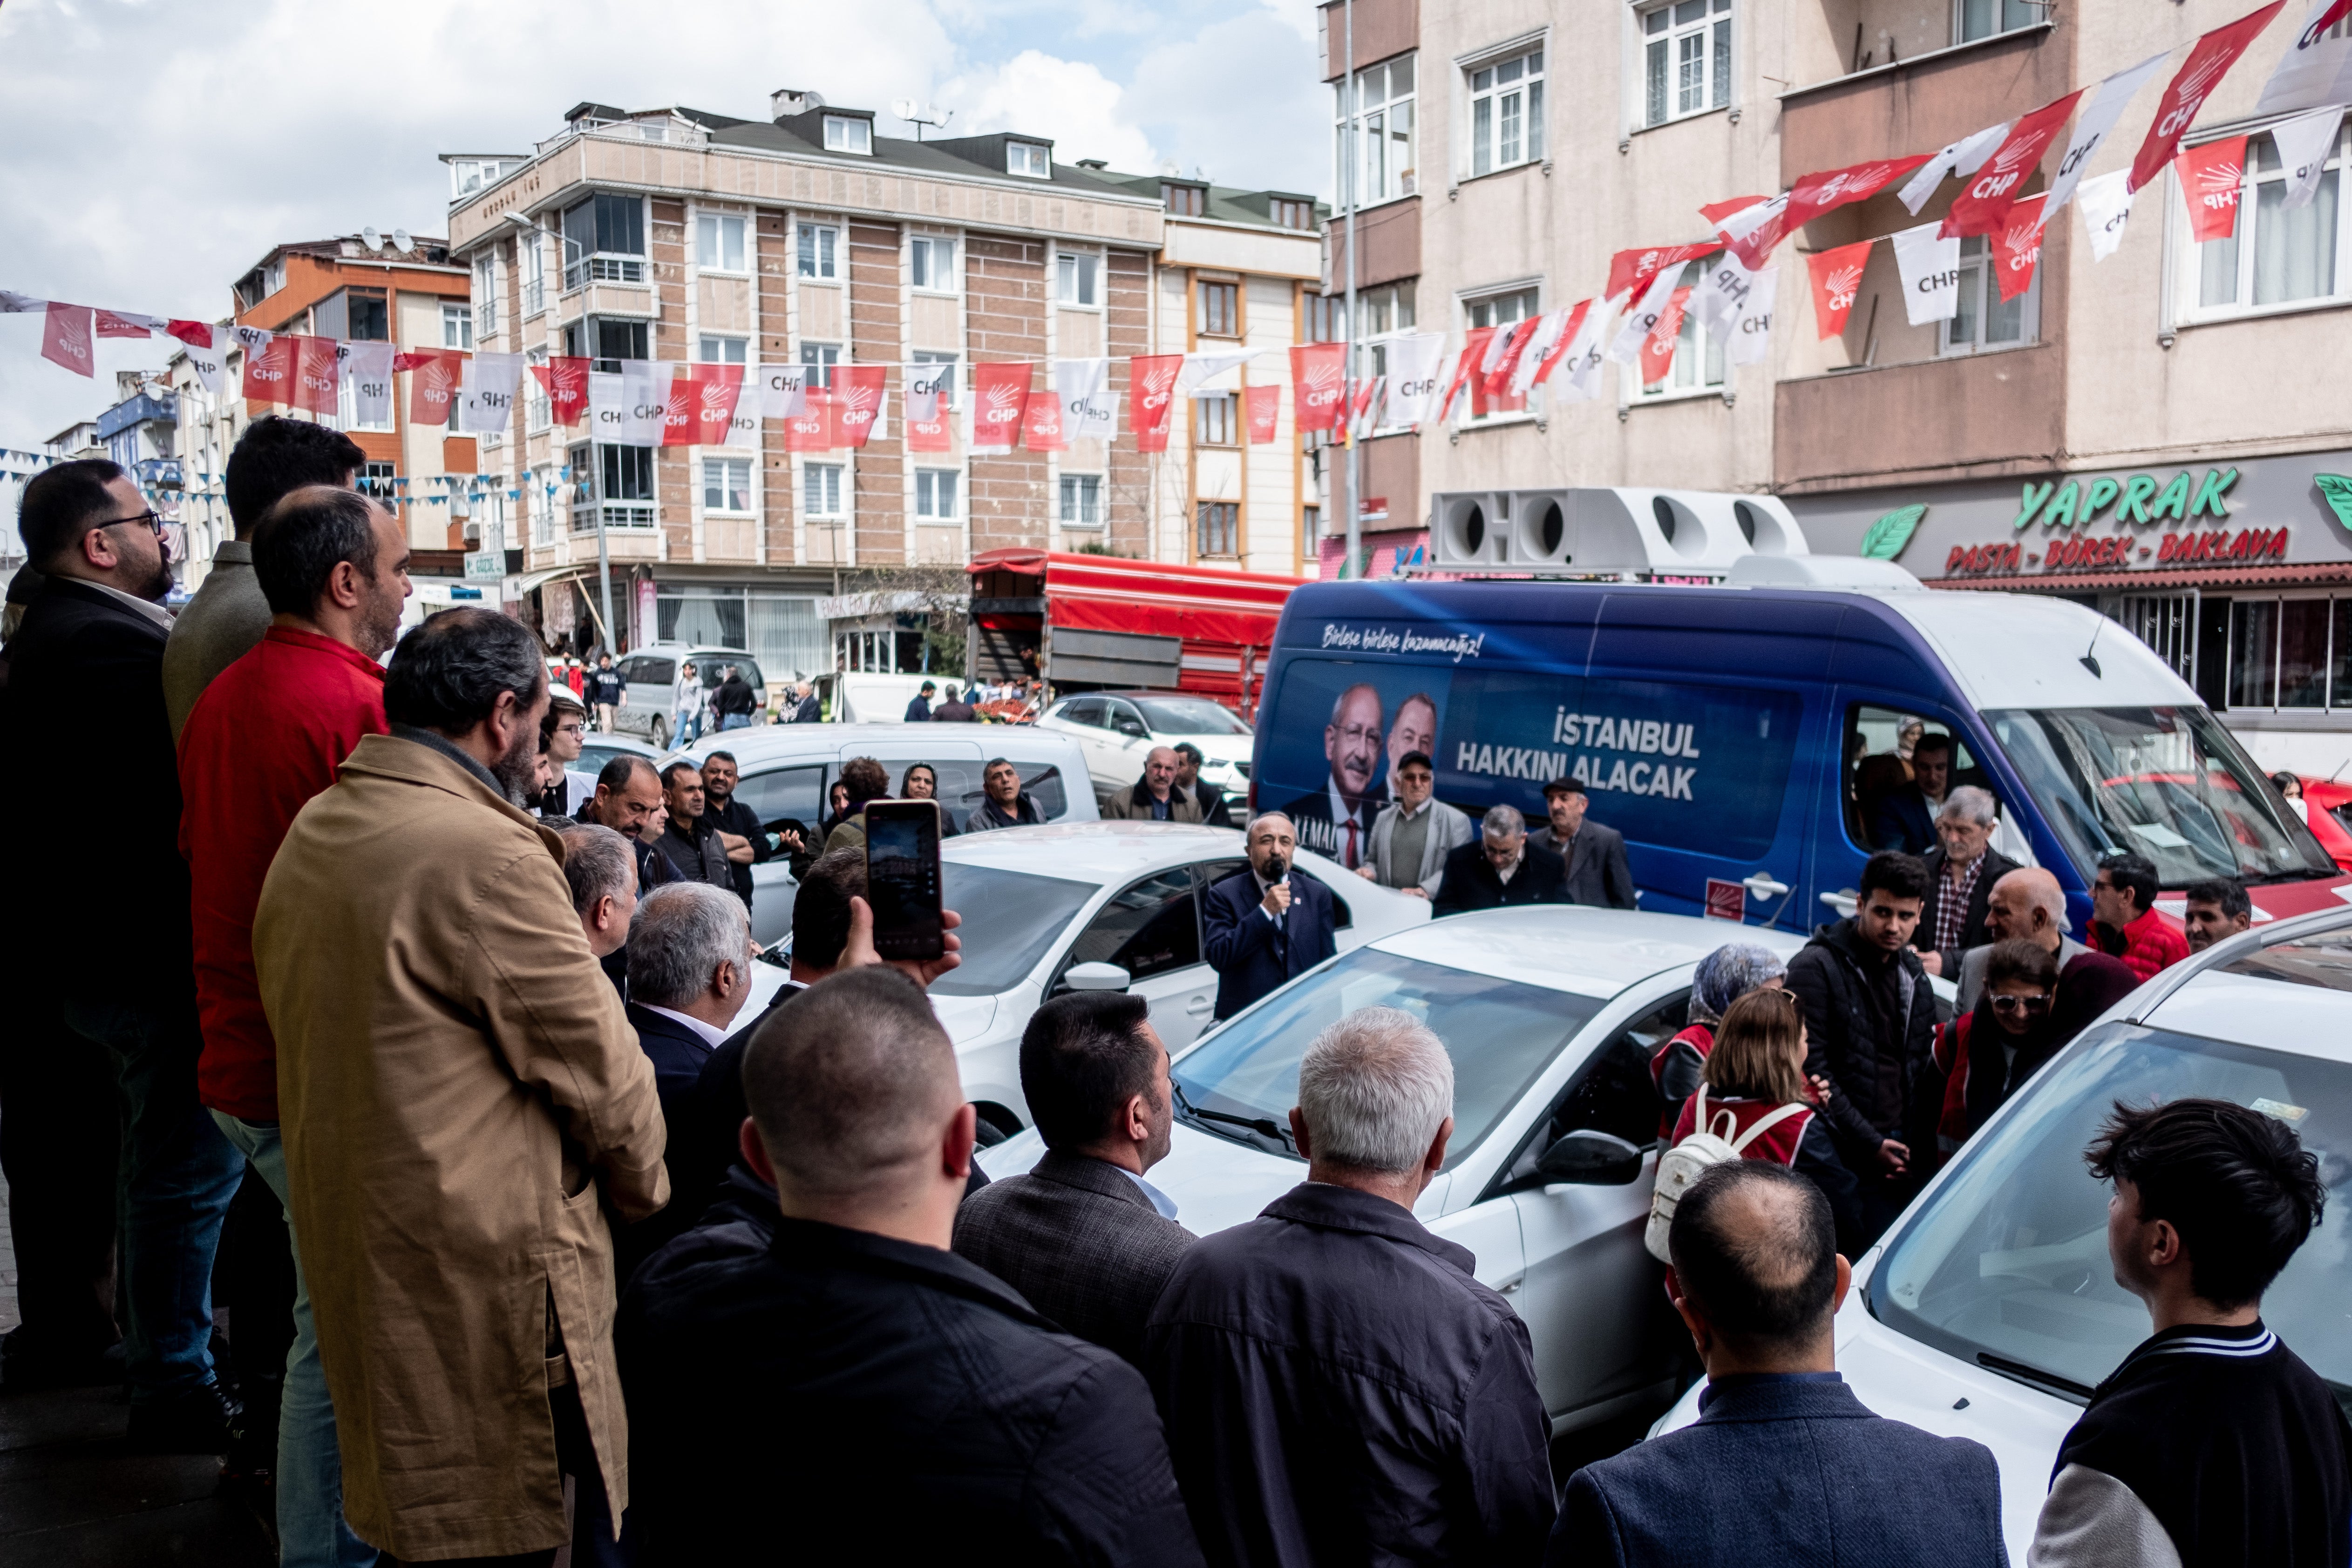 Turkey’s Republican People’s Party (CHP) launches a new campaign office in the Sultangazi district of Istanbul